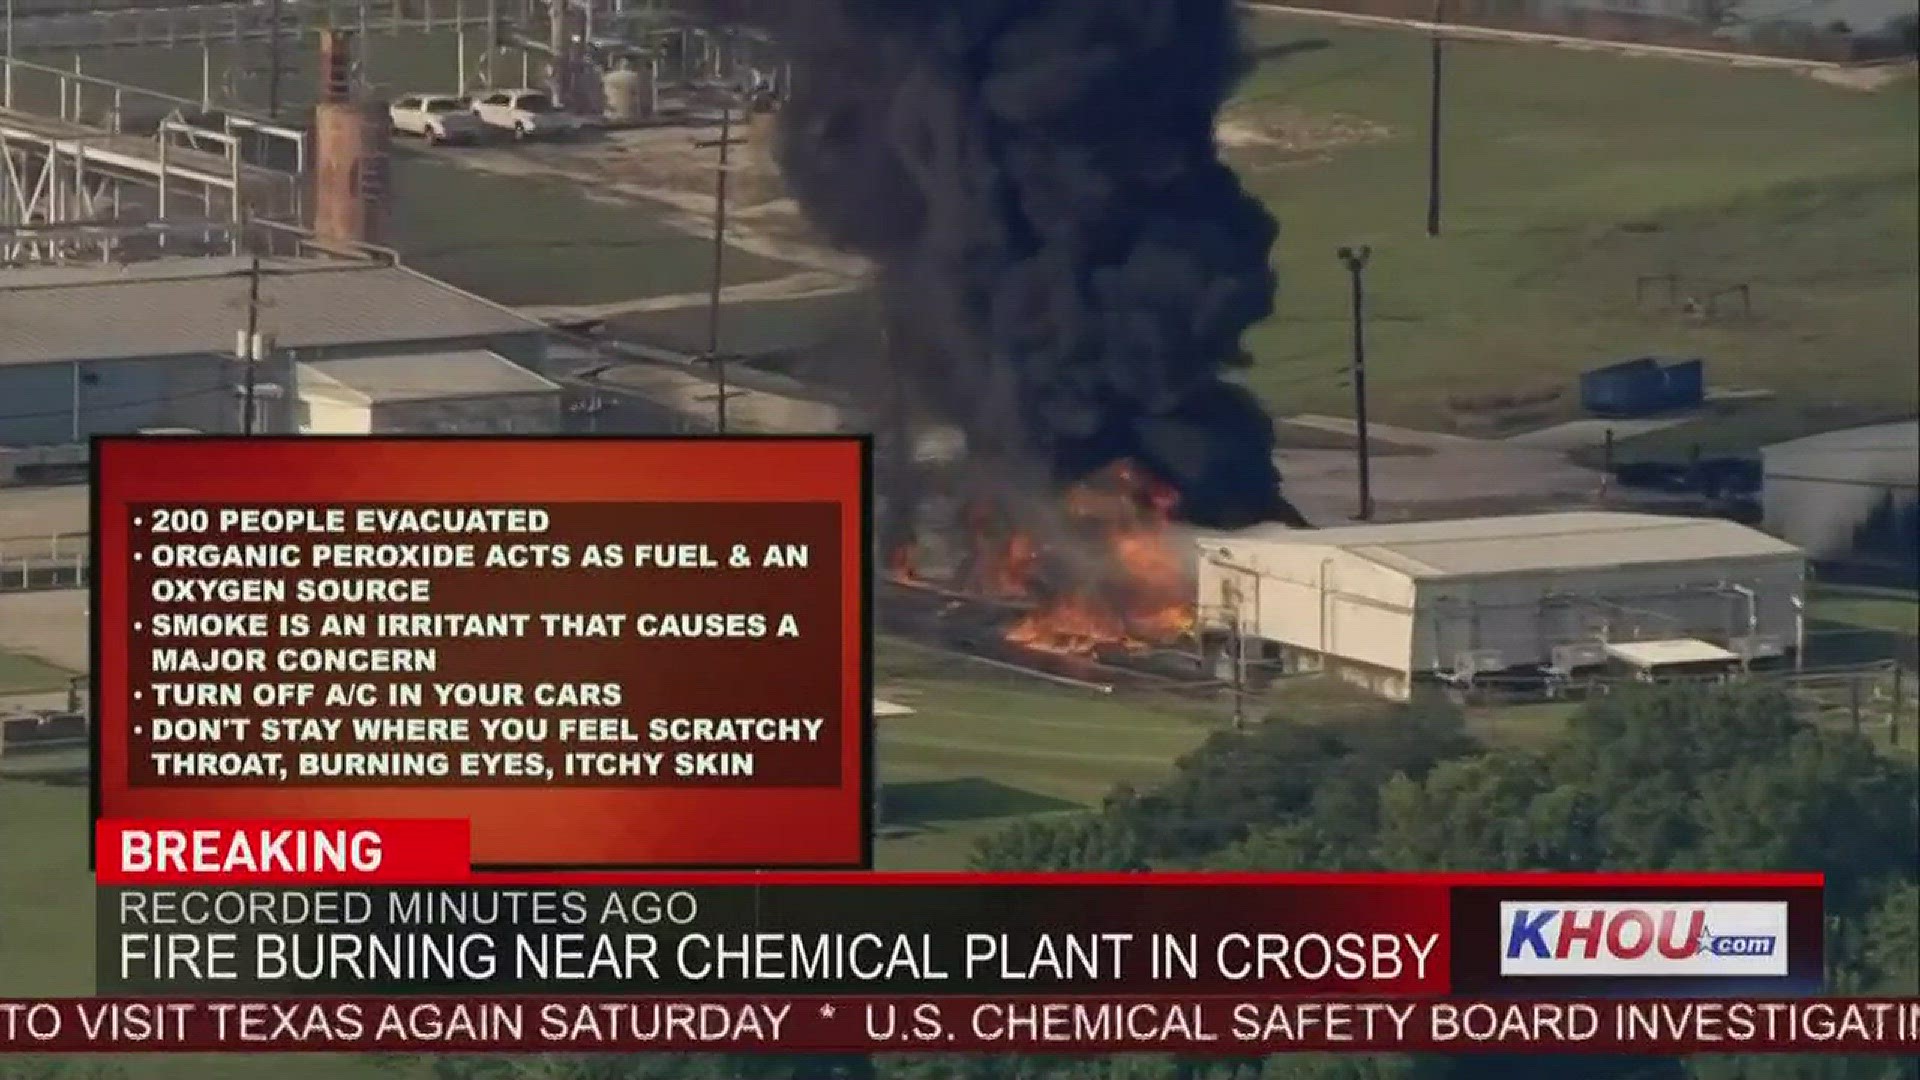 Massive flames engulfed the Arkema chemical plant in Crosby on Friday evening, sending irritating chemicals into the air. Officials say more explosions are likely.